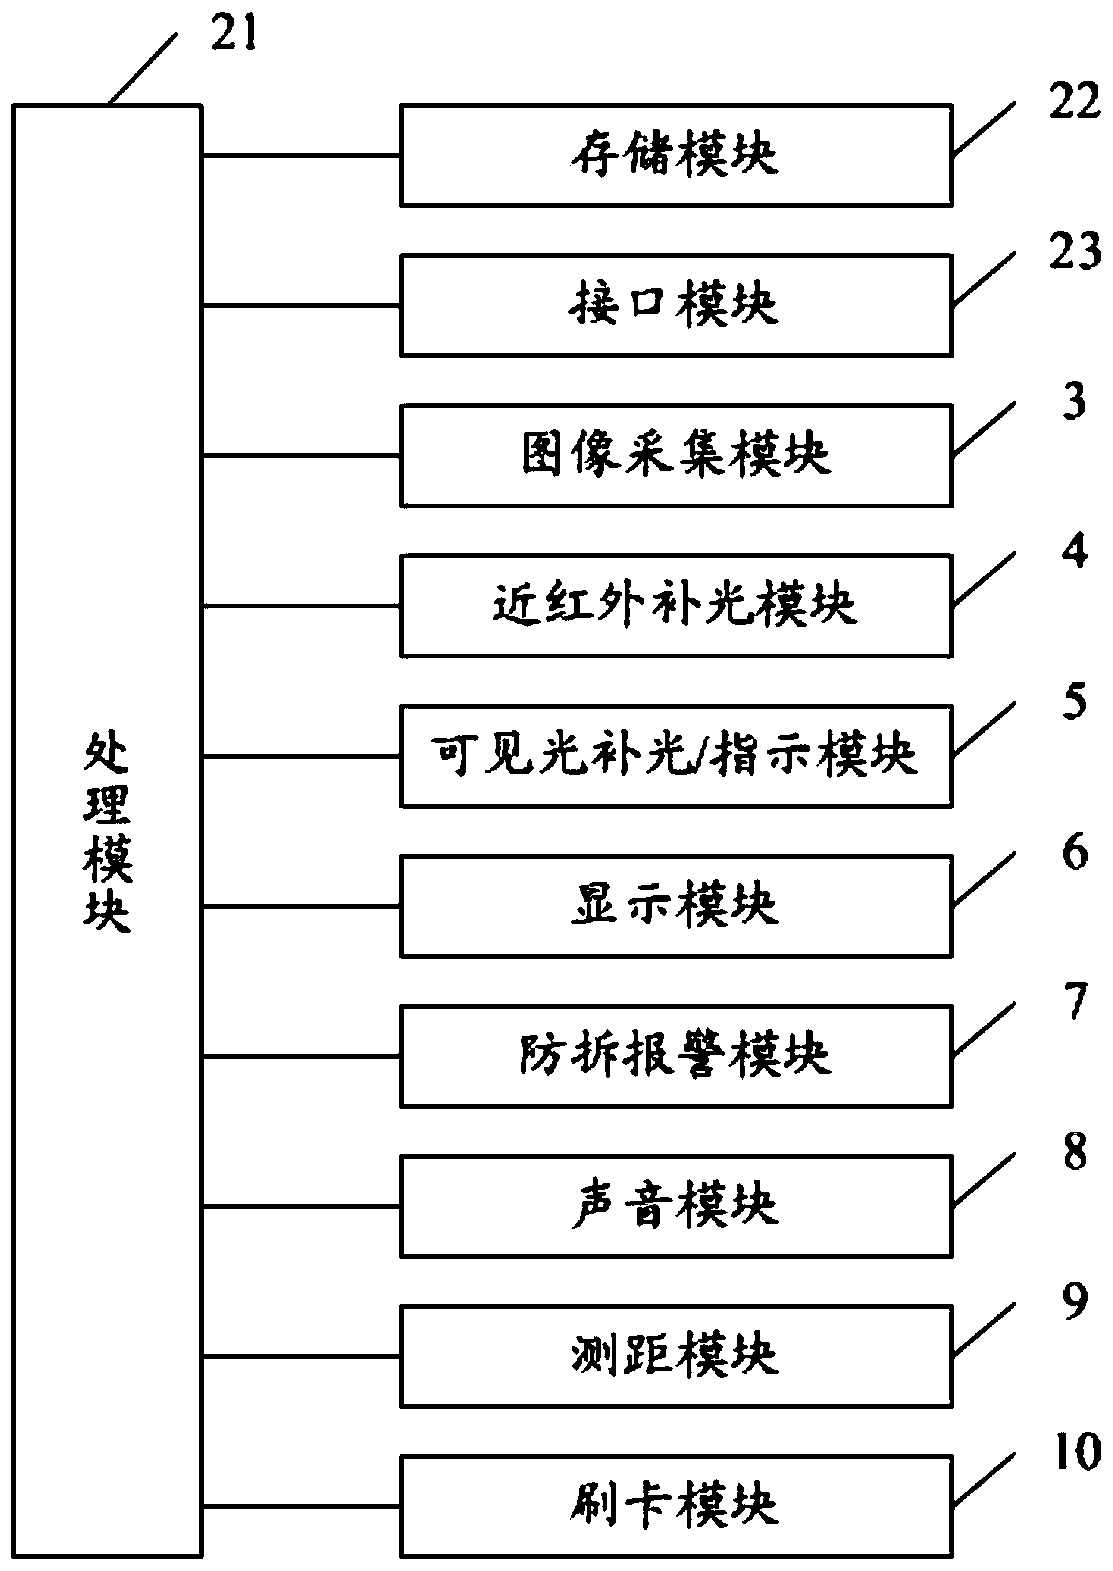 Biometric access control device and method of operation thereof